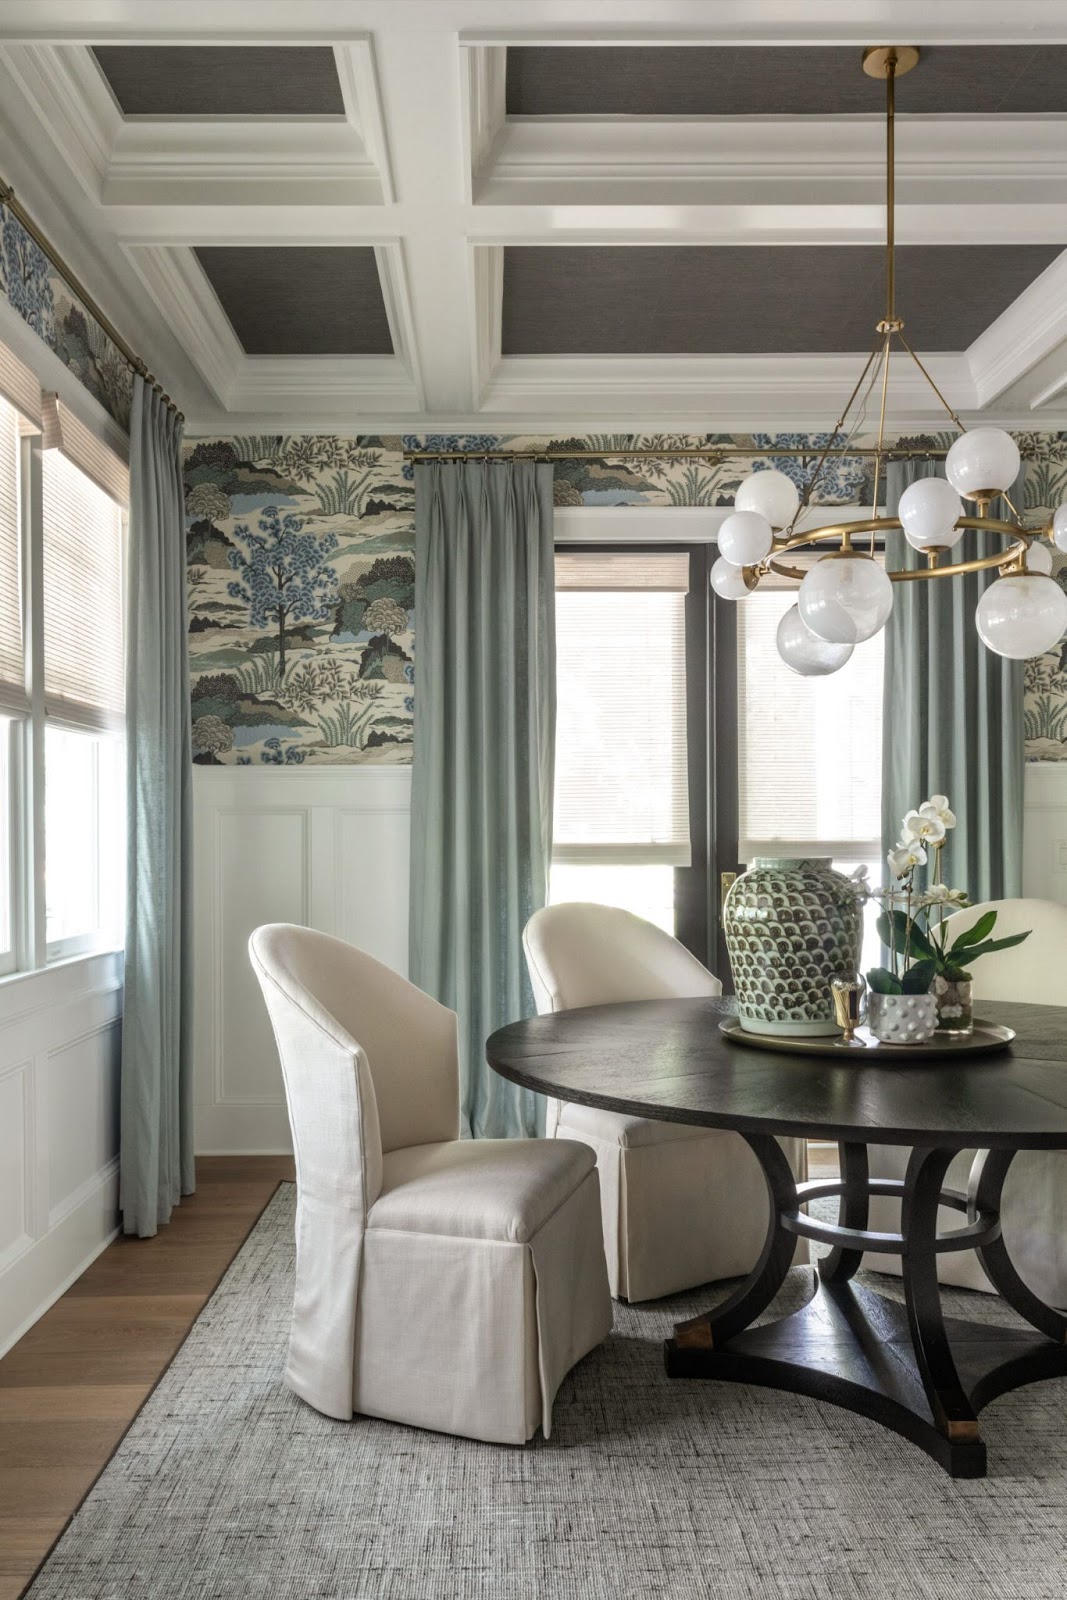 A dining room with a round wooden table, four white upholstered chairs, and a large vase centerpiece. The room has a coffered ceiling, traditional wallpaper with a nature theme, and light blue curtains framing a window.